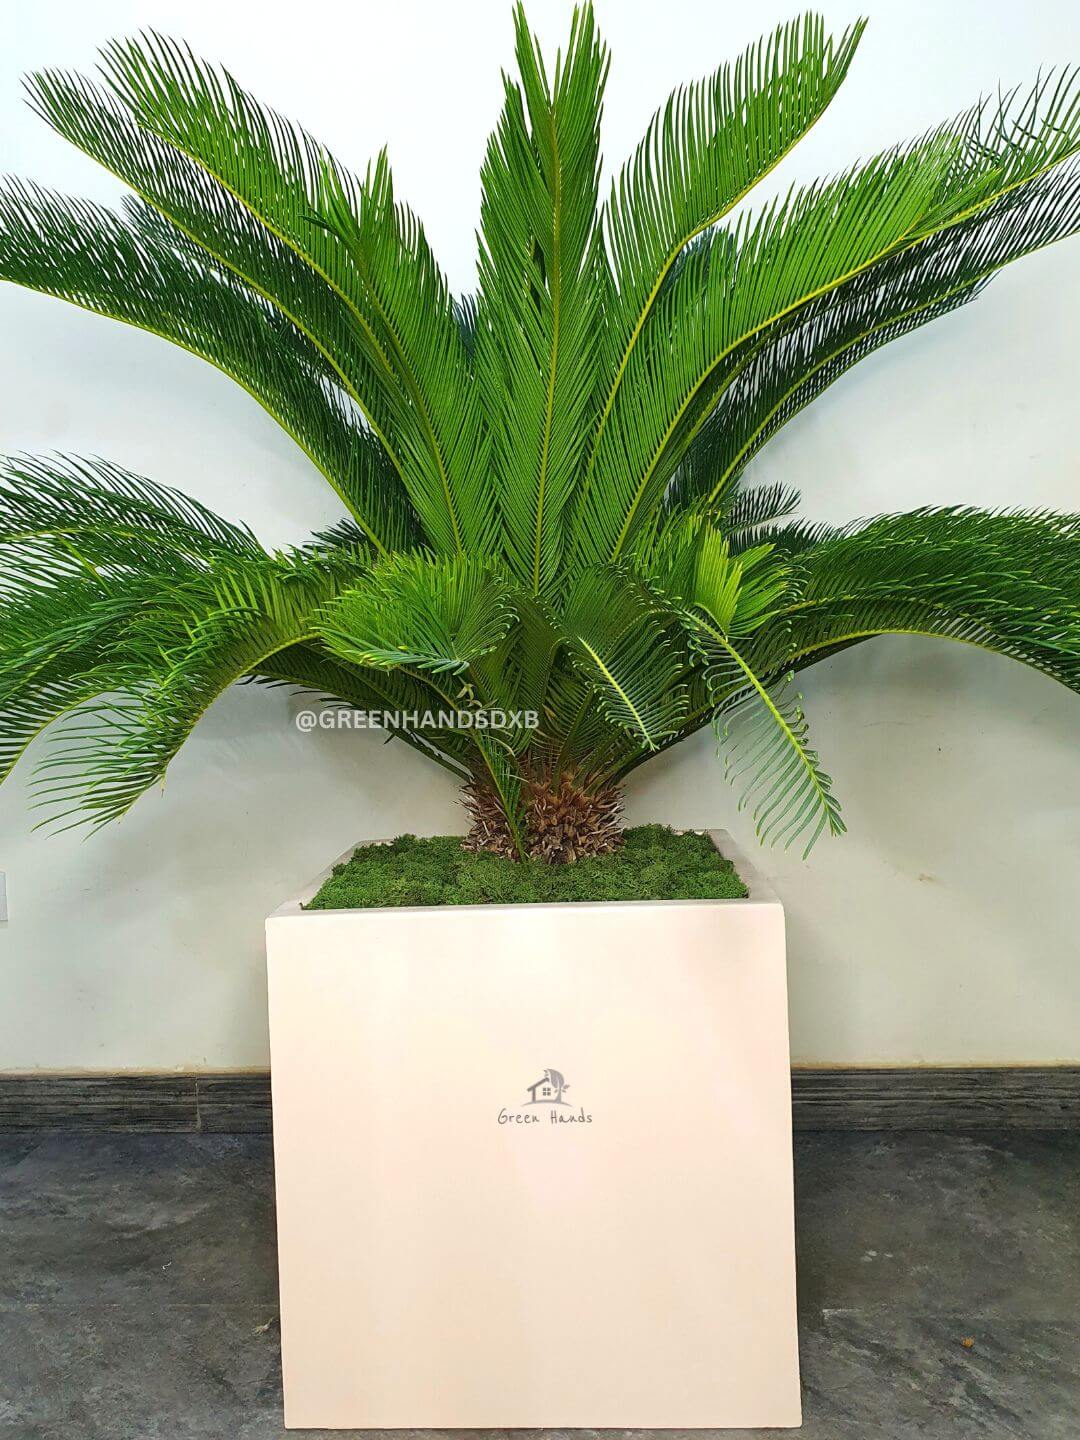 Potted XL Cycus Revoluta Palm or Sago Palm Plant | Designer Collection Cube XL Planted in Beige Pot Smooth Finished